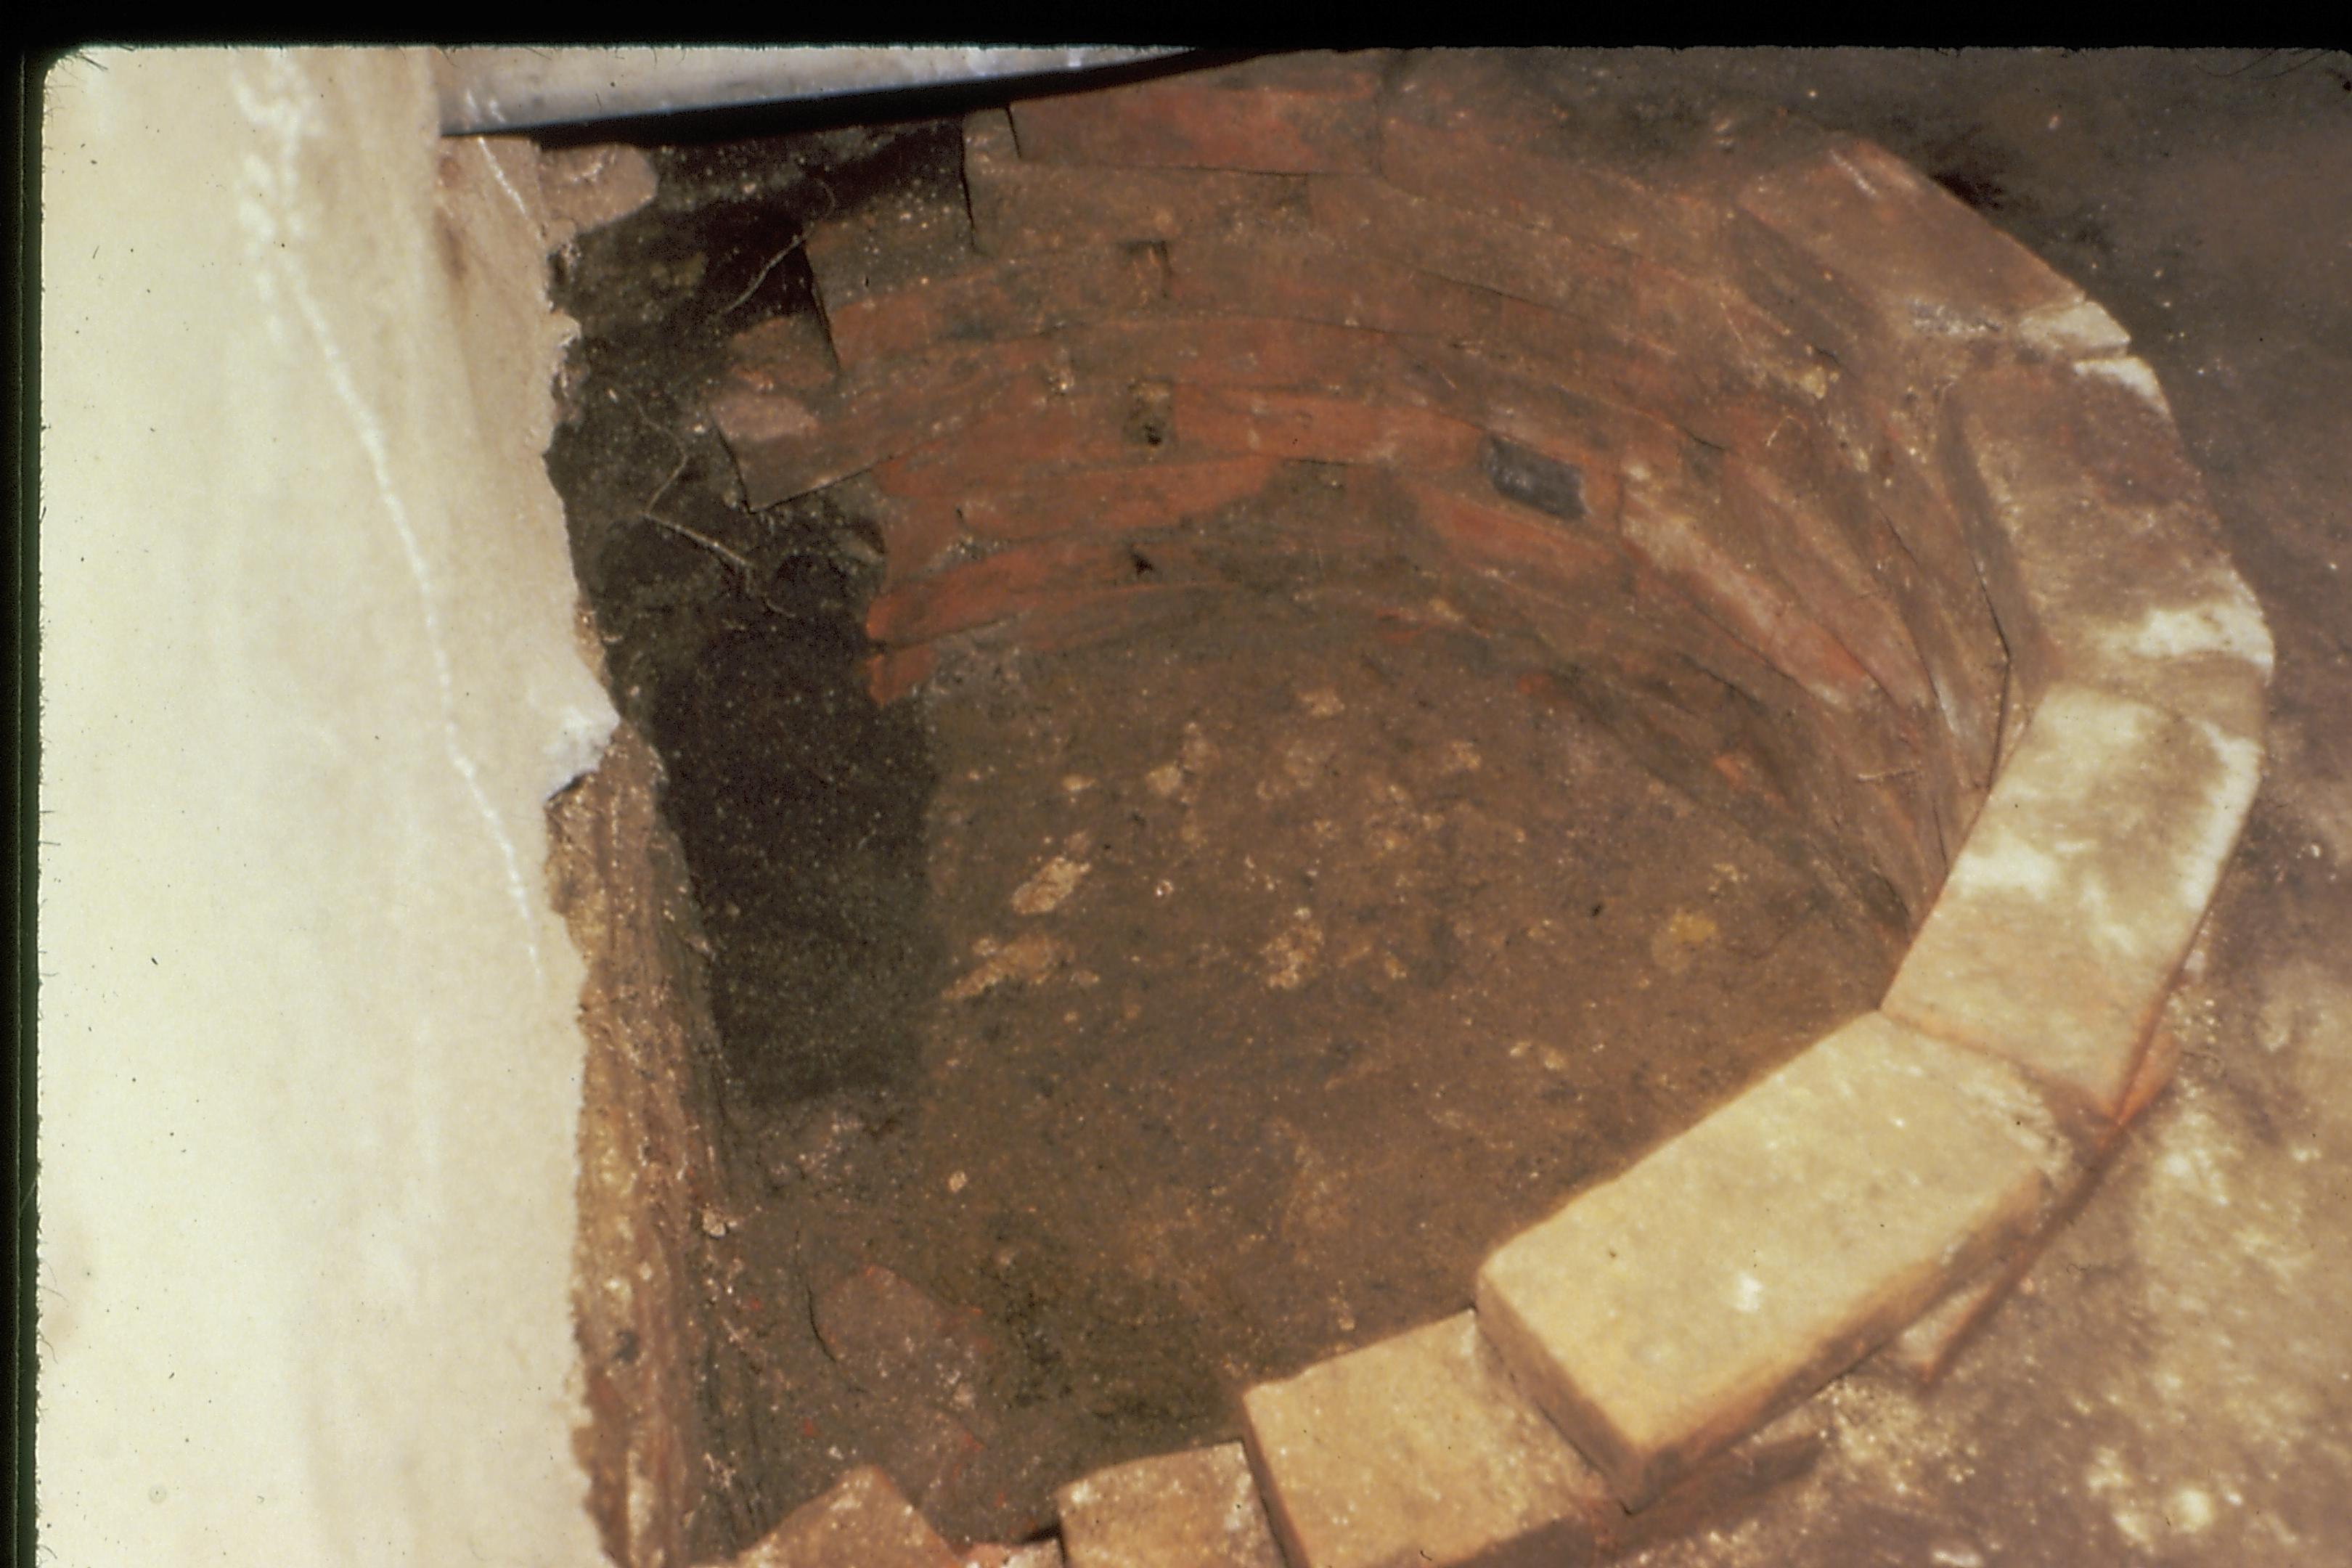 Lincoln Home ground water well, located under east porch of the Lincoln Home. This well was rendered inoperable when the east section of the home was moved south 6' in 1846. Photographer facing south.